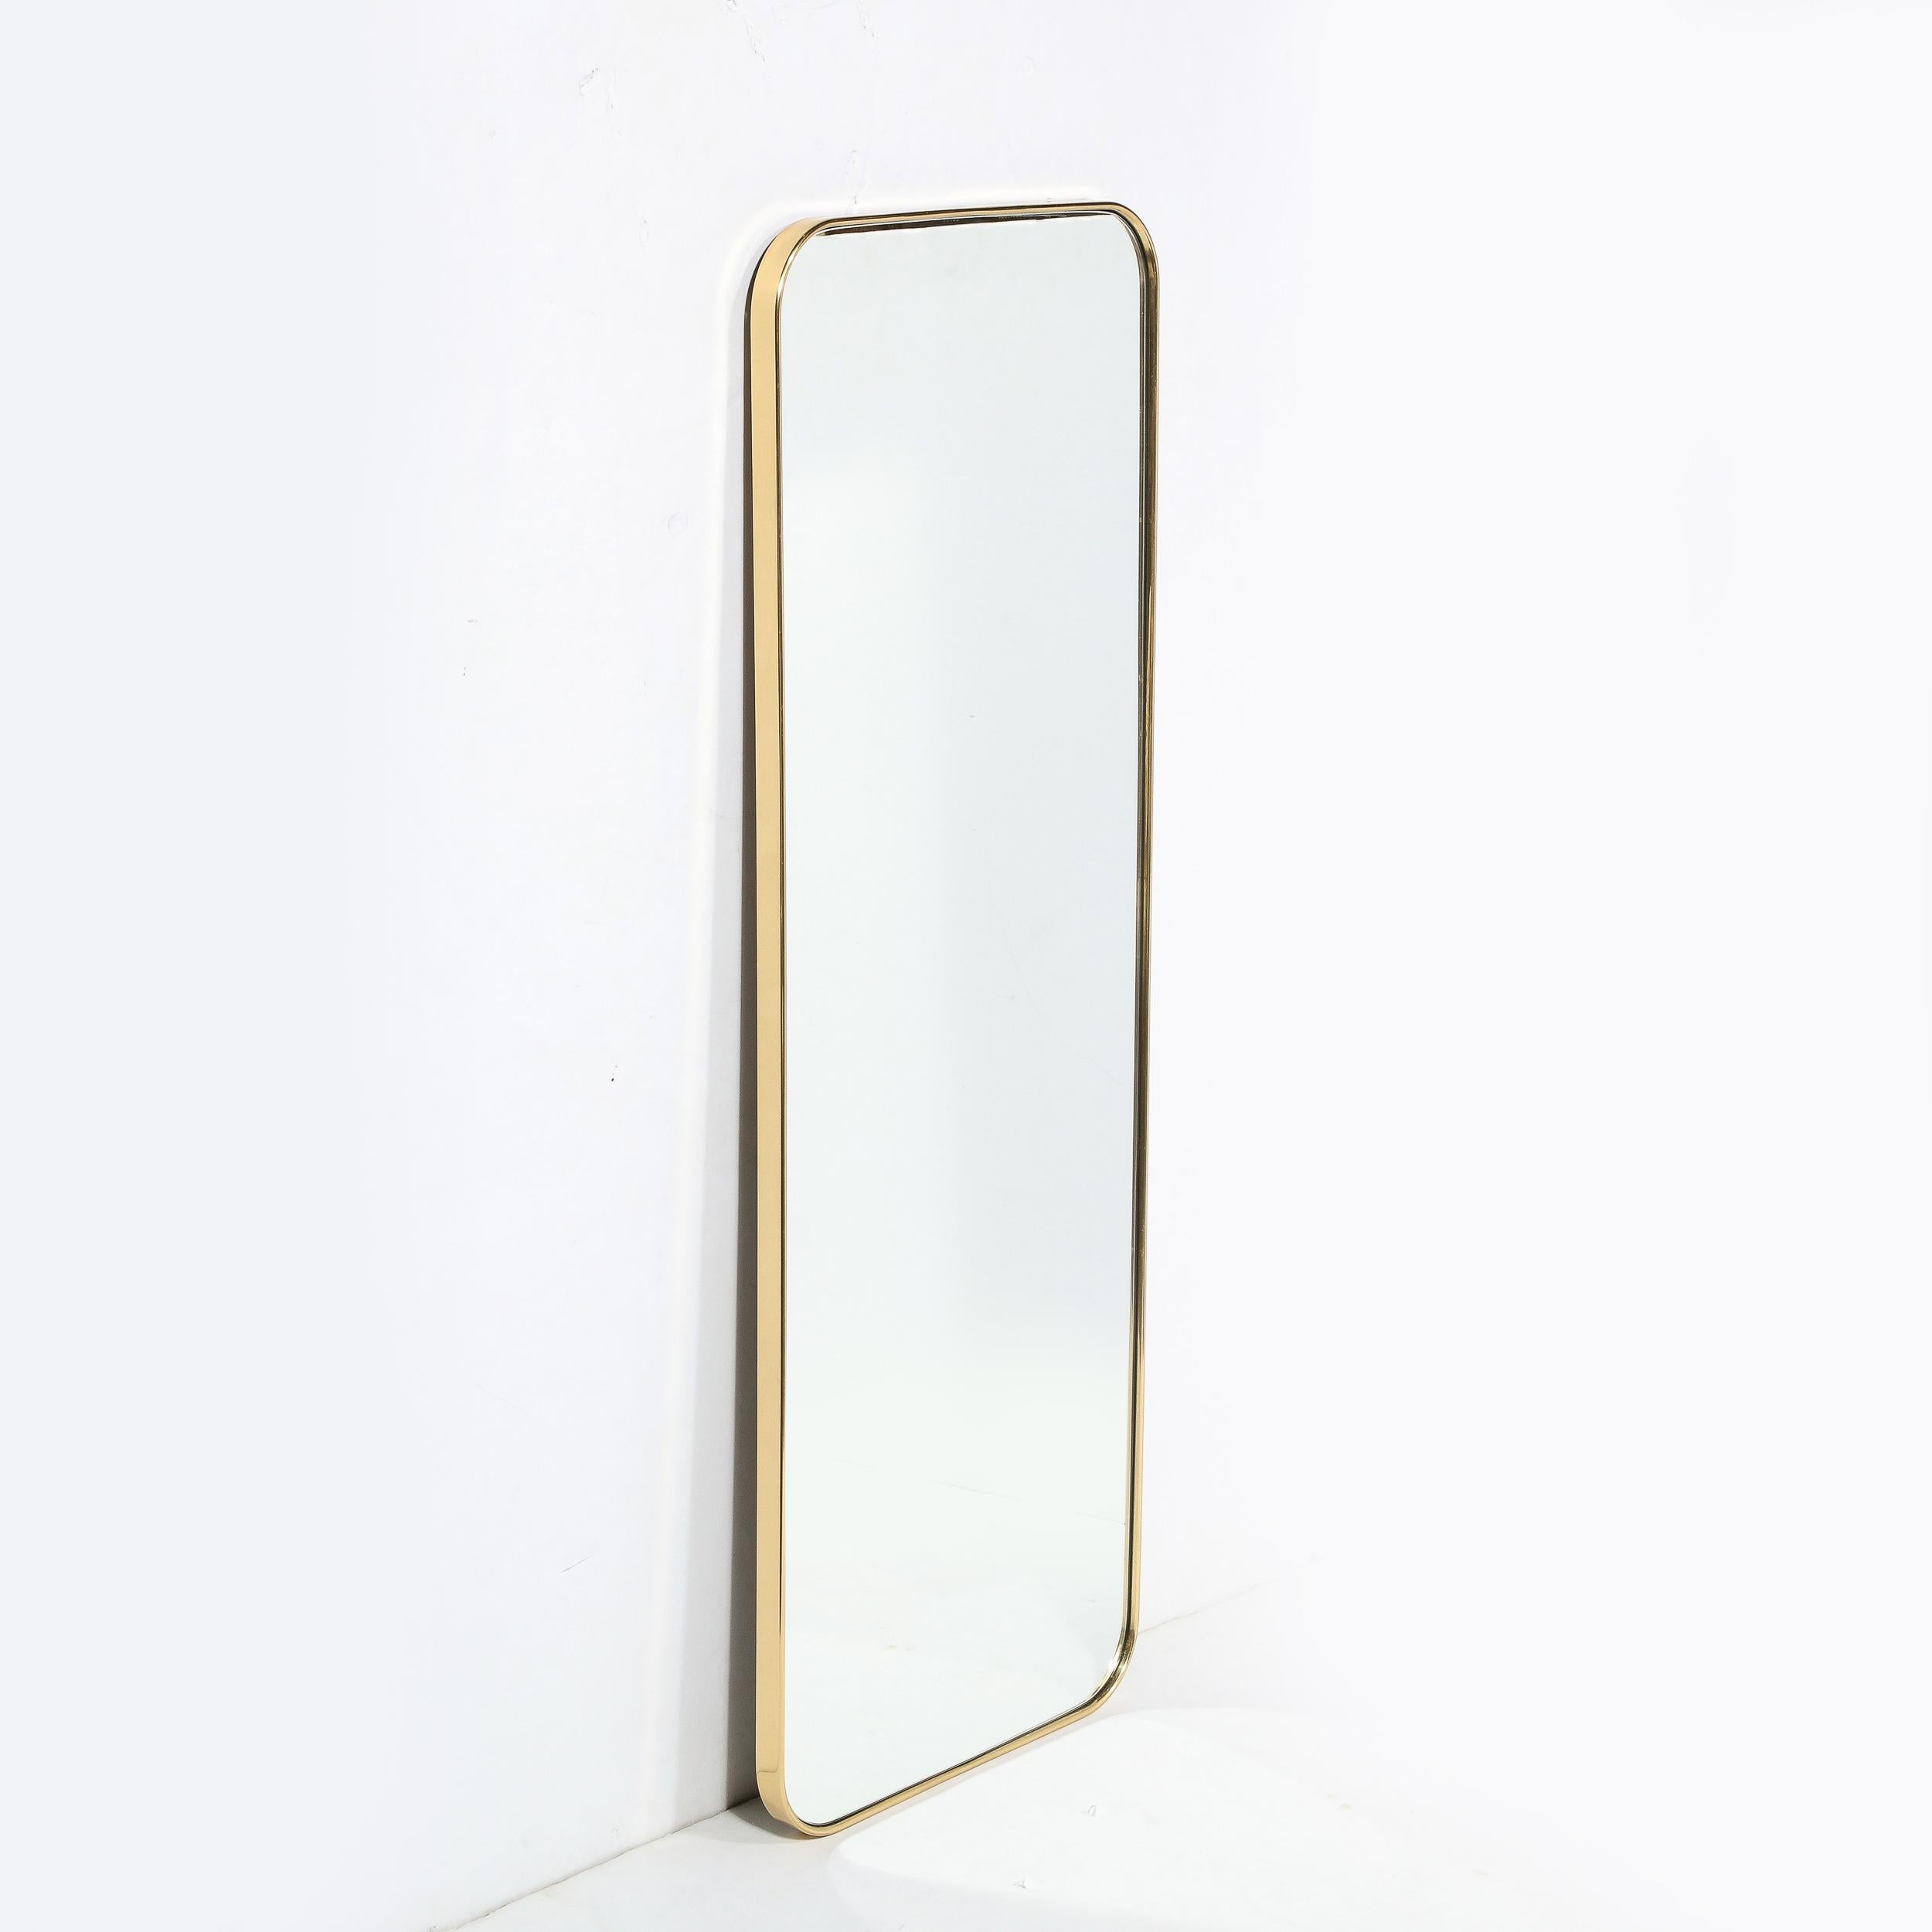 This stunning and graphic modernist mirror was newly realized in the United States exclusively for High Style Deco. Inspired by Classic Mid Century Italian Mirrors of the 1950s, this piece offers a rectangular form with rounded corners wrapped in